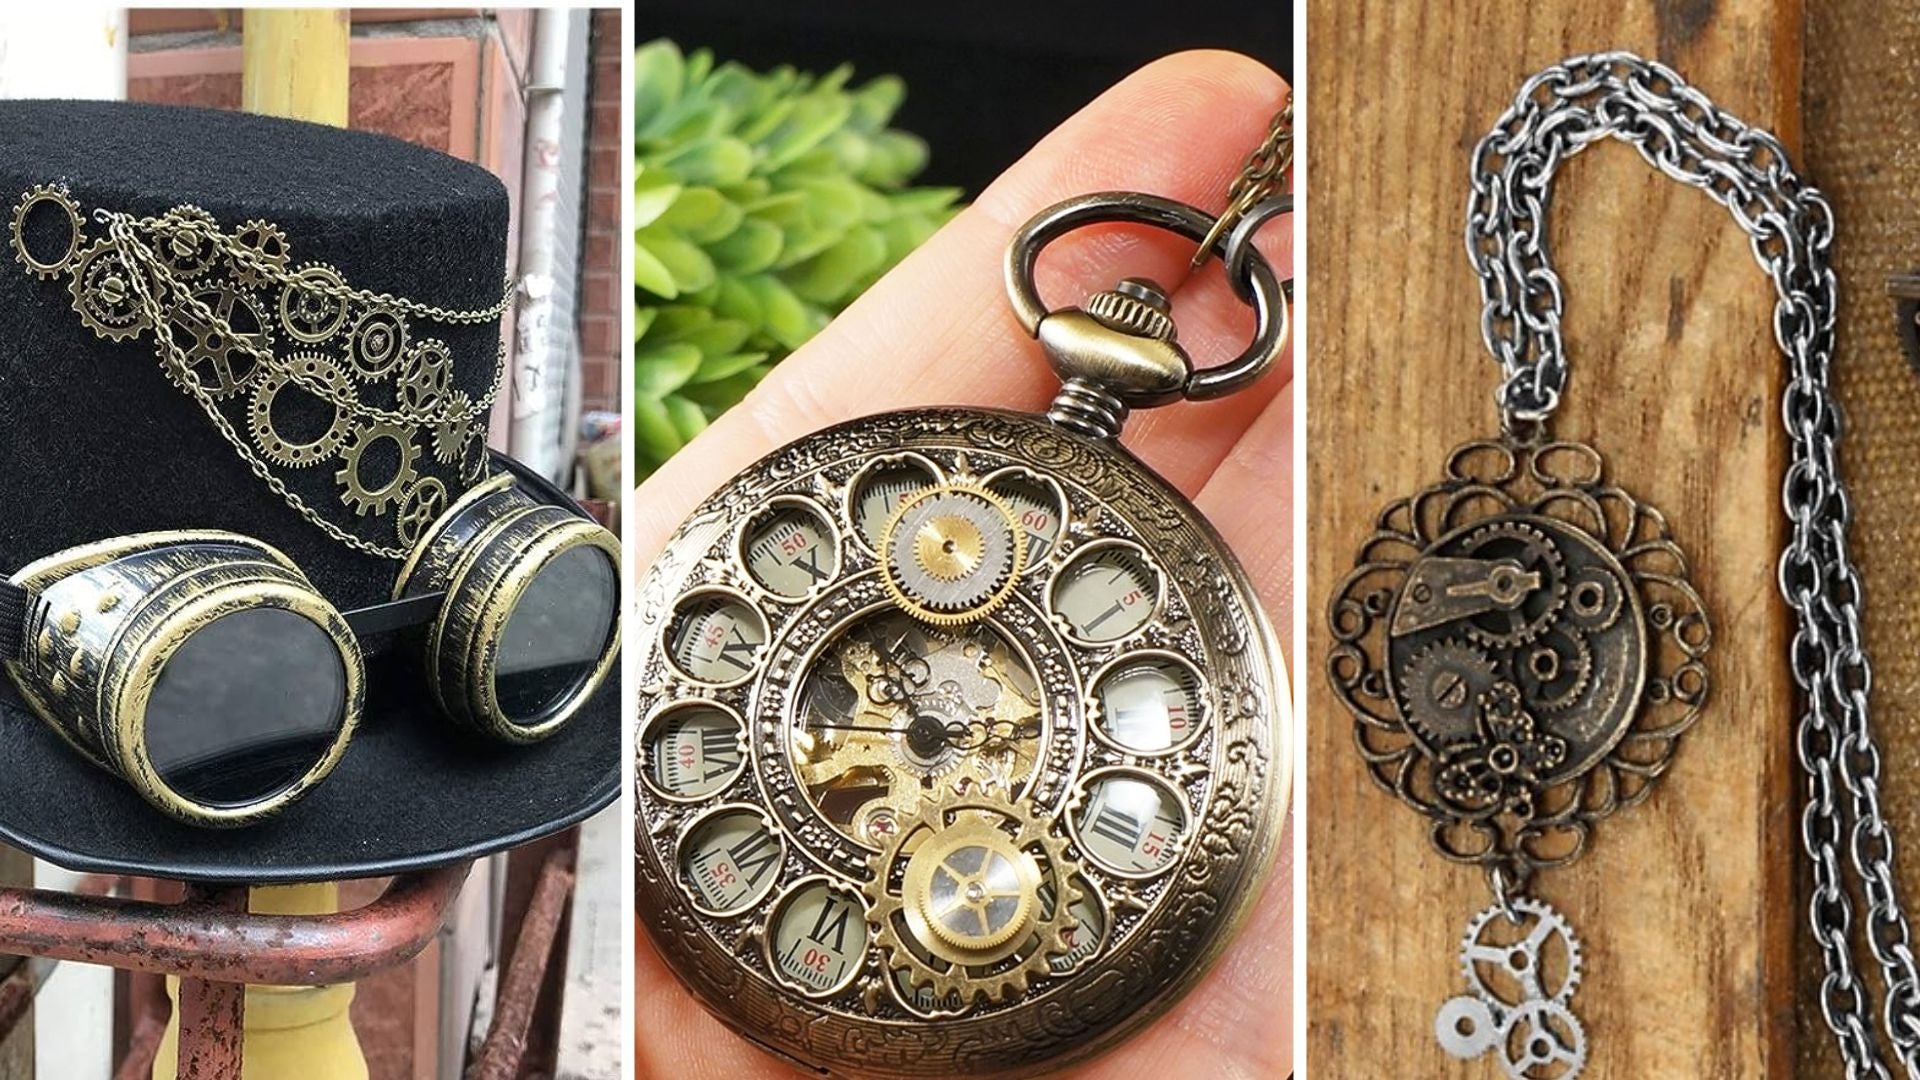 The Quintessence of Steampunk: Top 20 Fashion Must-Haves